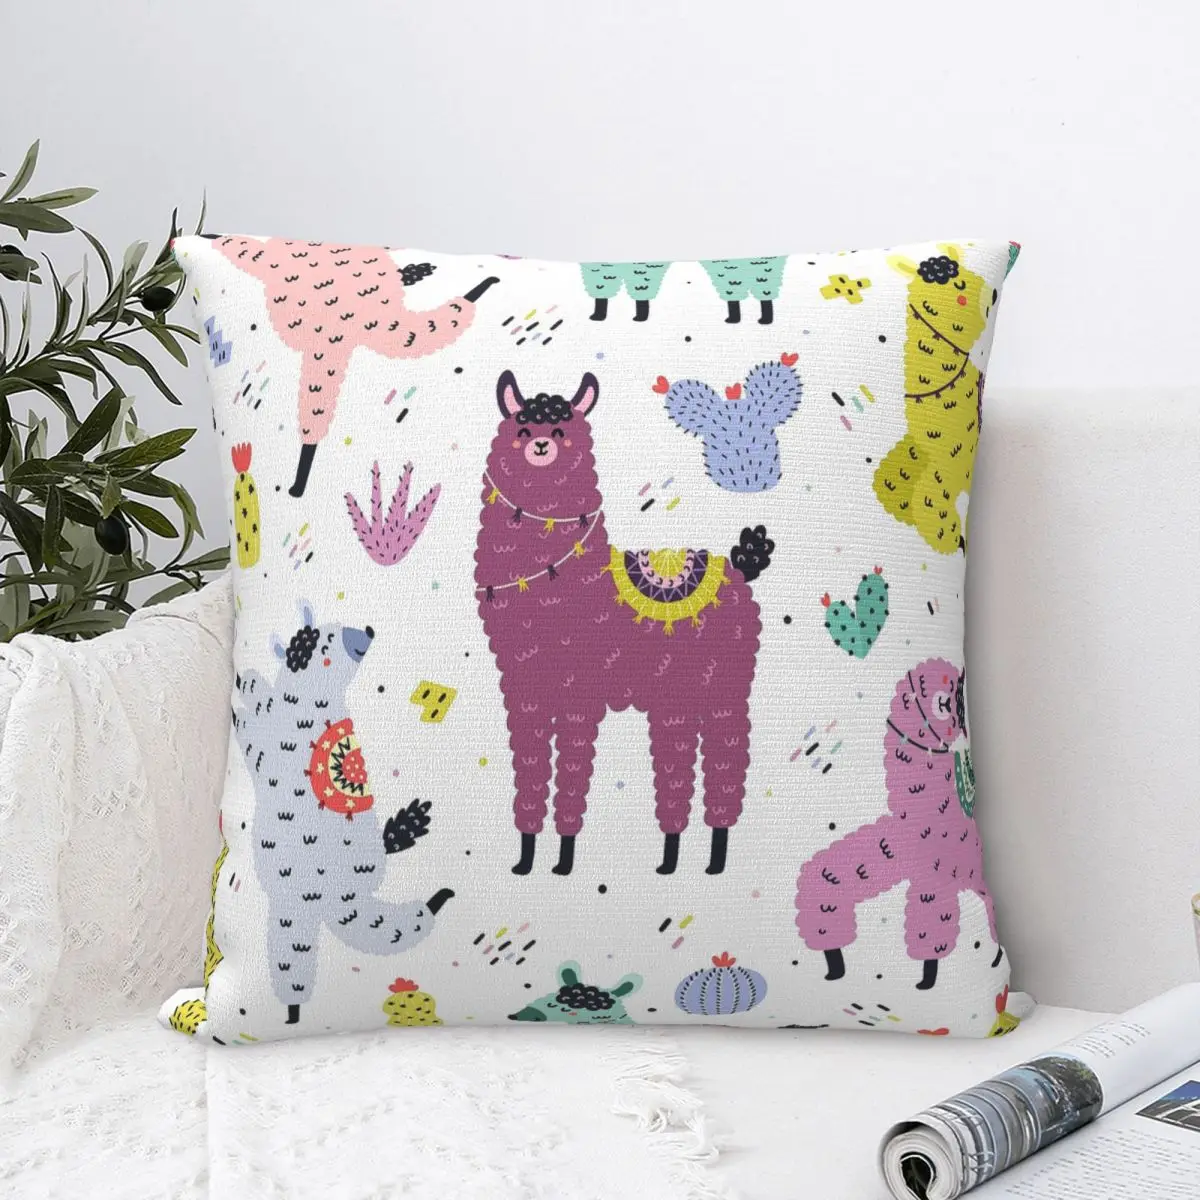 

Beautiful Sheep Throw Pillow Case Alpaca Clever Lively Naughty Lovely Cherubic Backpack Hugpillow Covers DIY Printed Kawaii